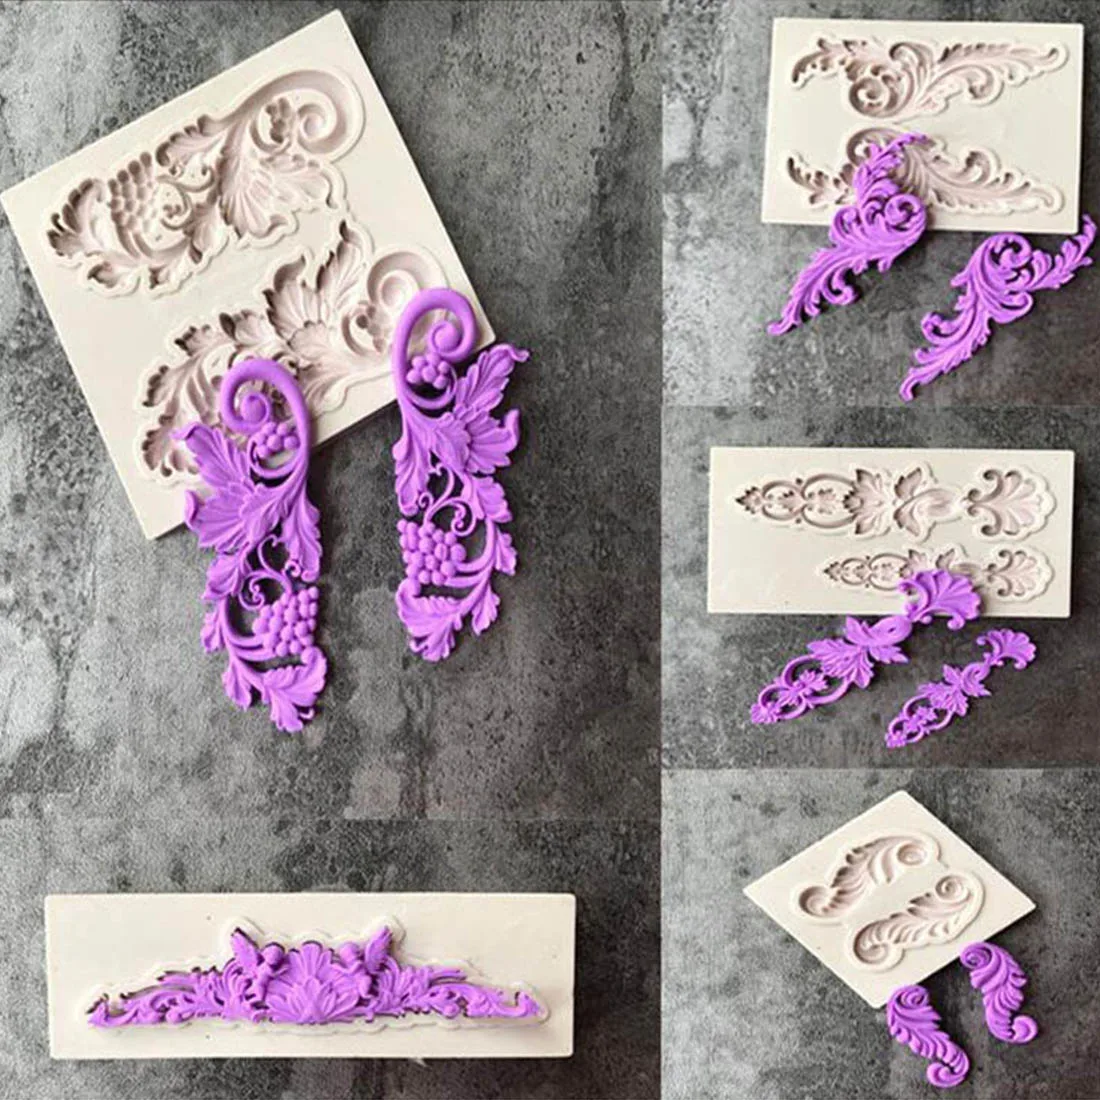 Details about   Vintage Relief Totem Silicone Mold Fondant Mould Cake Sugarcraft Decorating Tool 